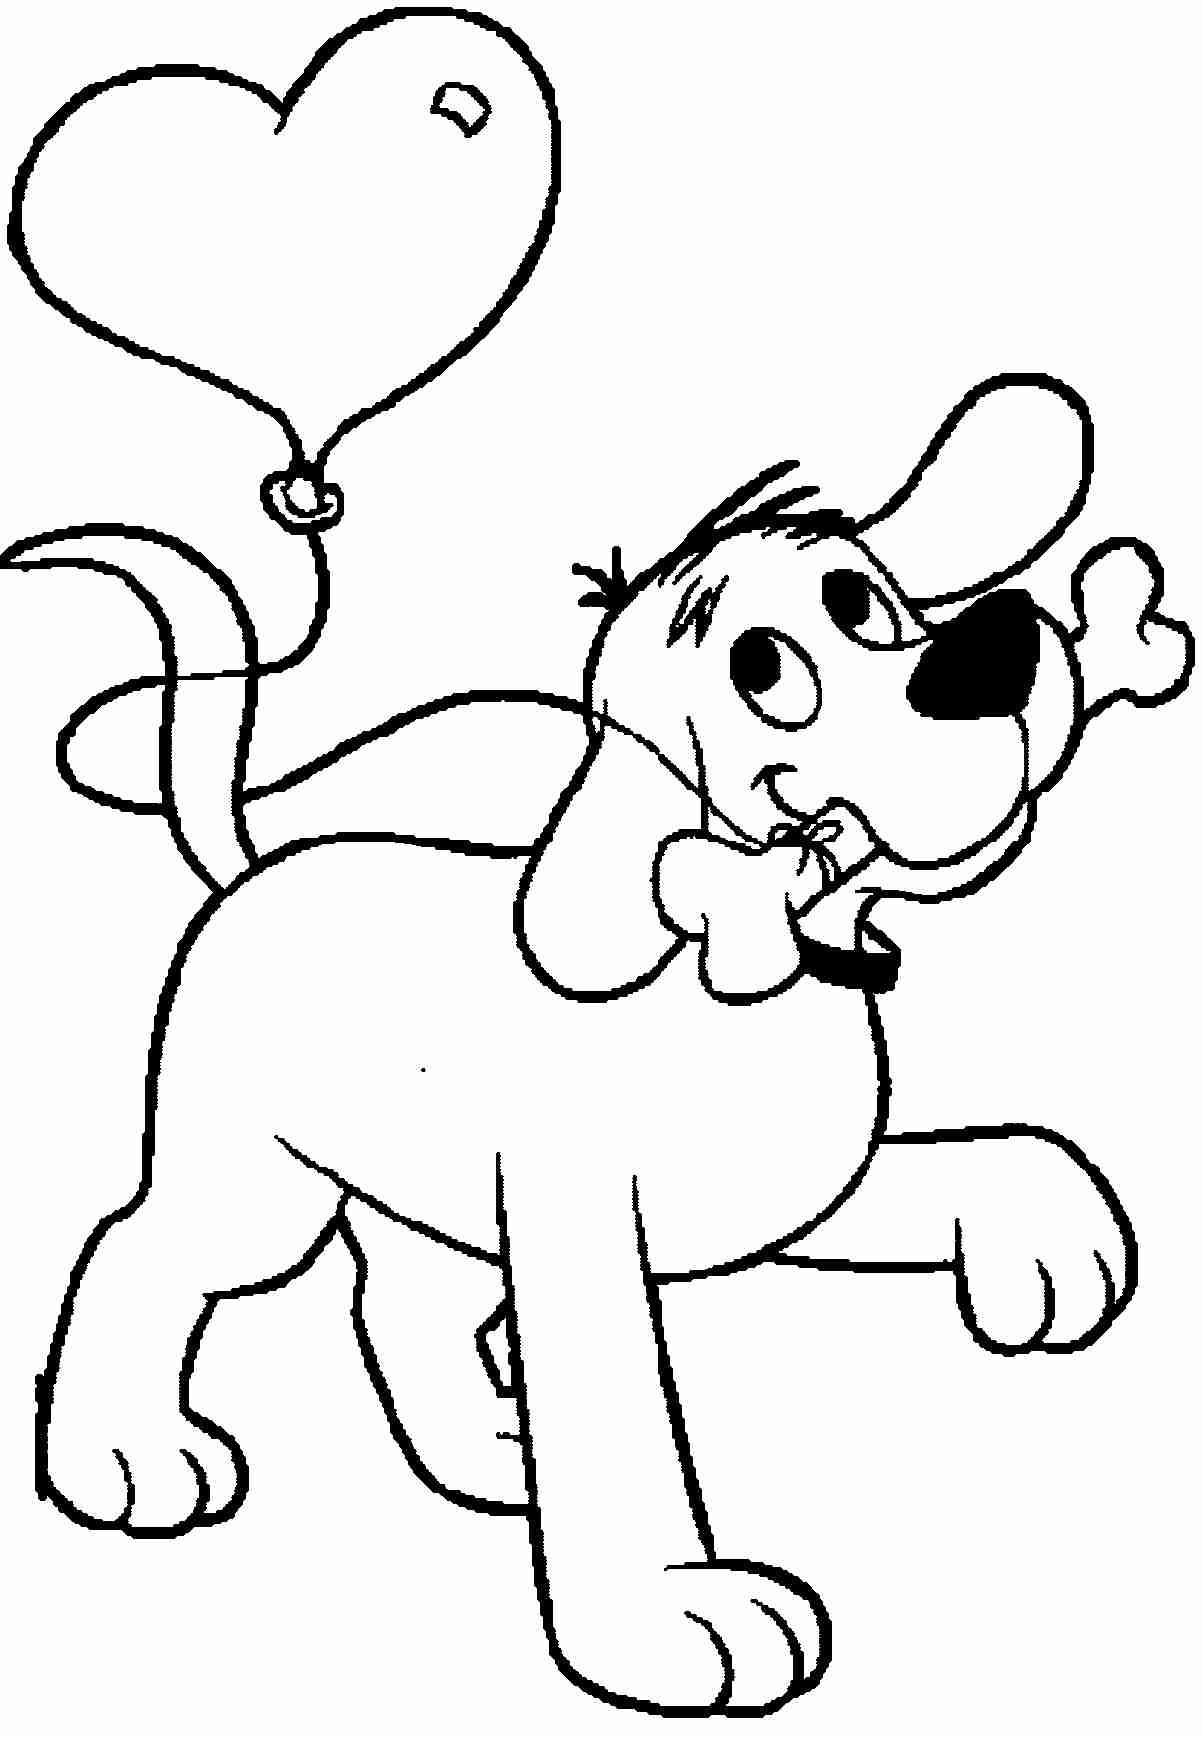 Clifford the Big Red Dog Coloring Pages Wallpaper